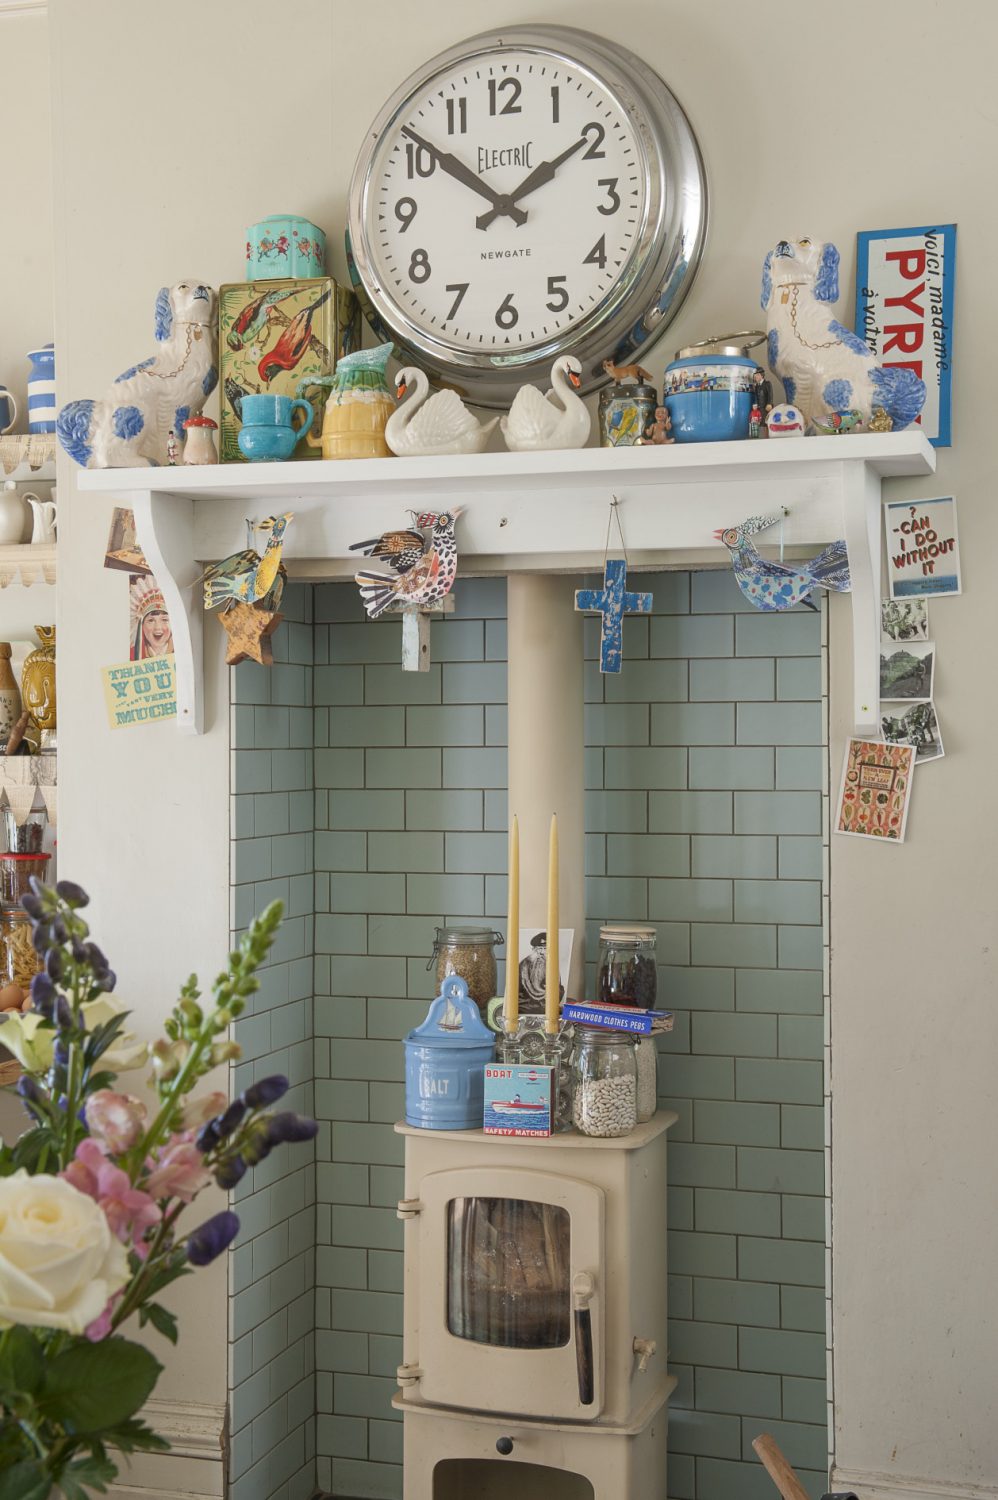 A duck egg blue tiled alcove houses a woodburning stove